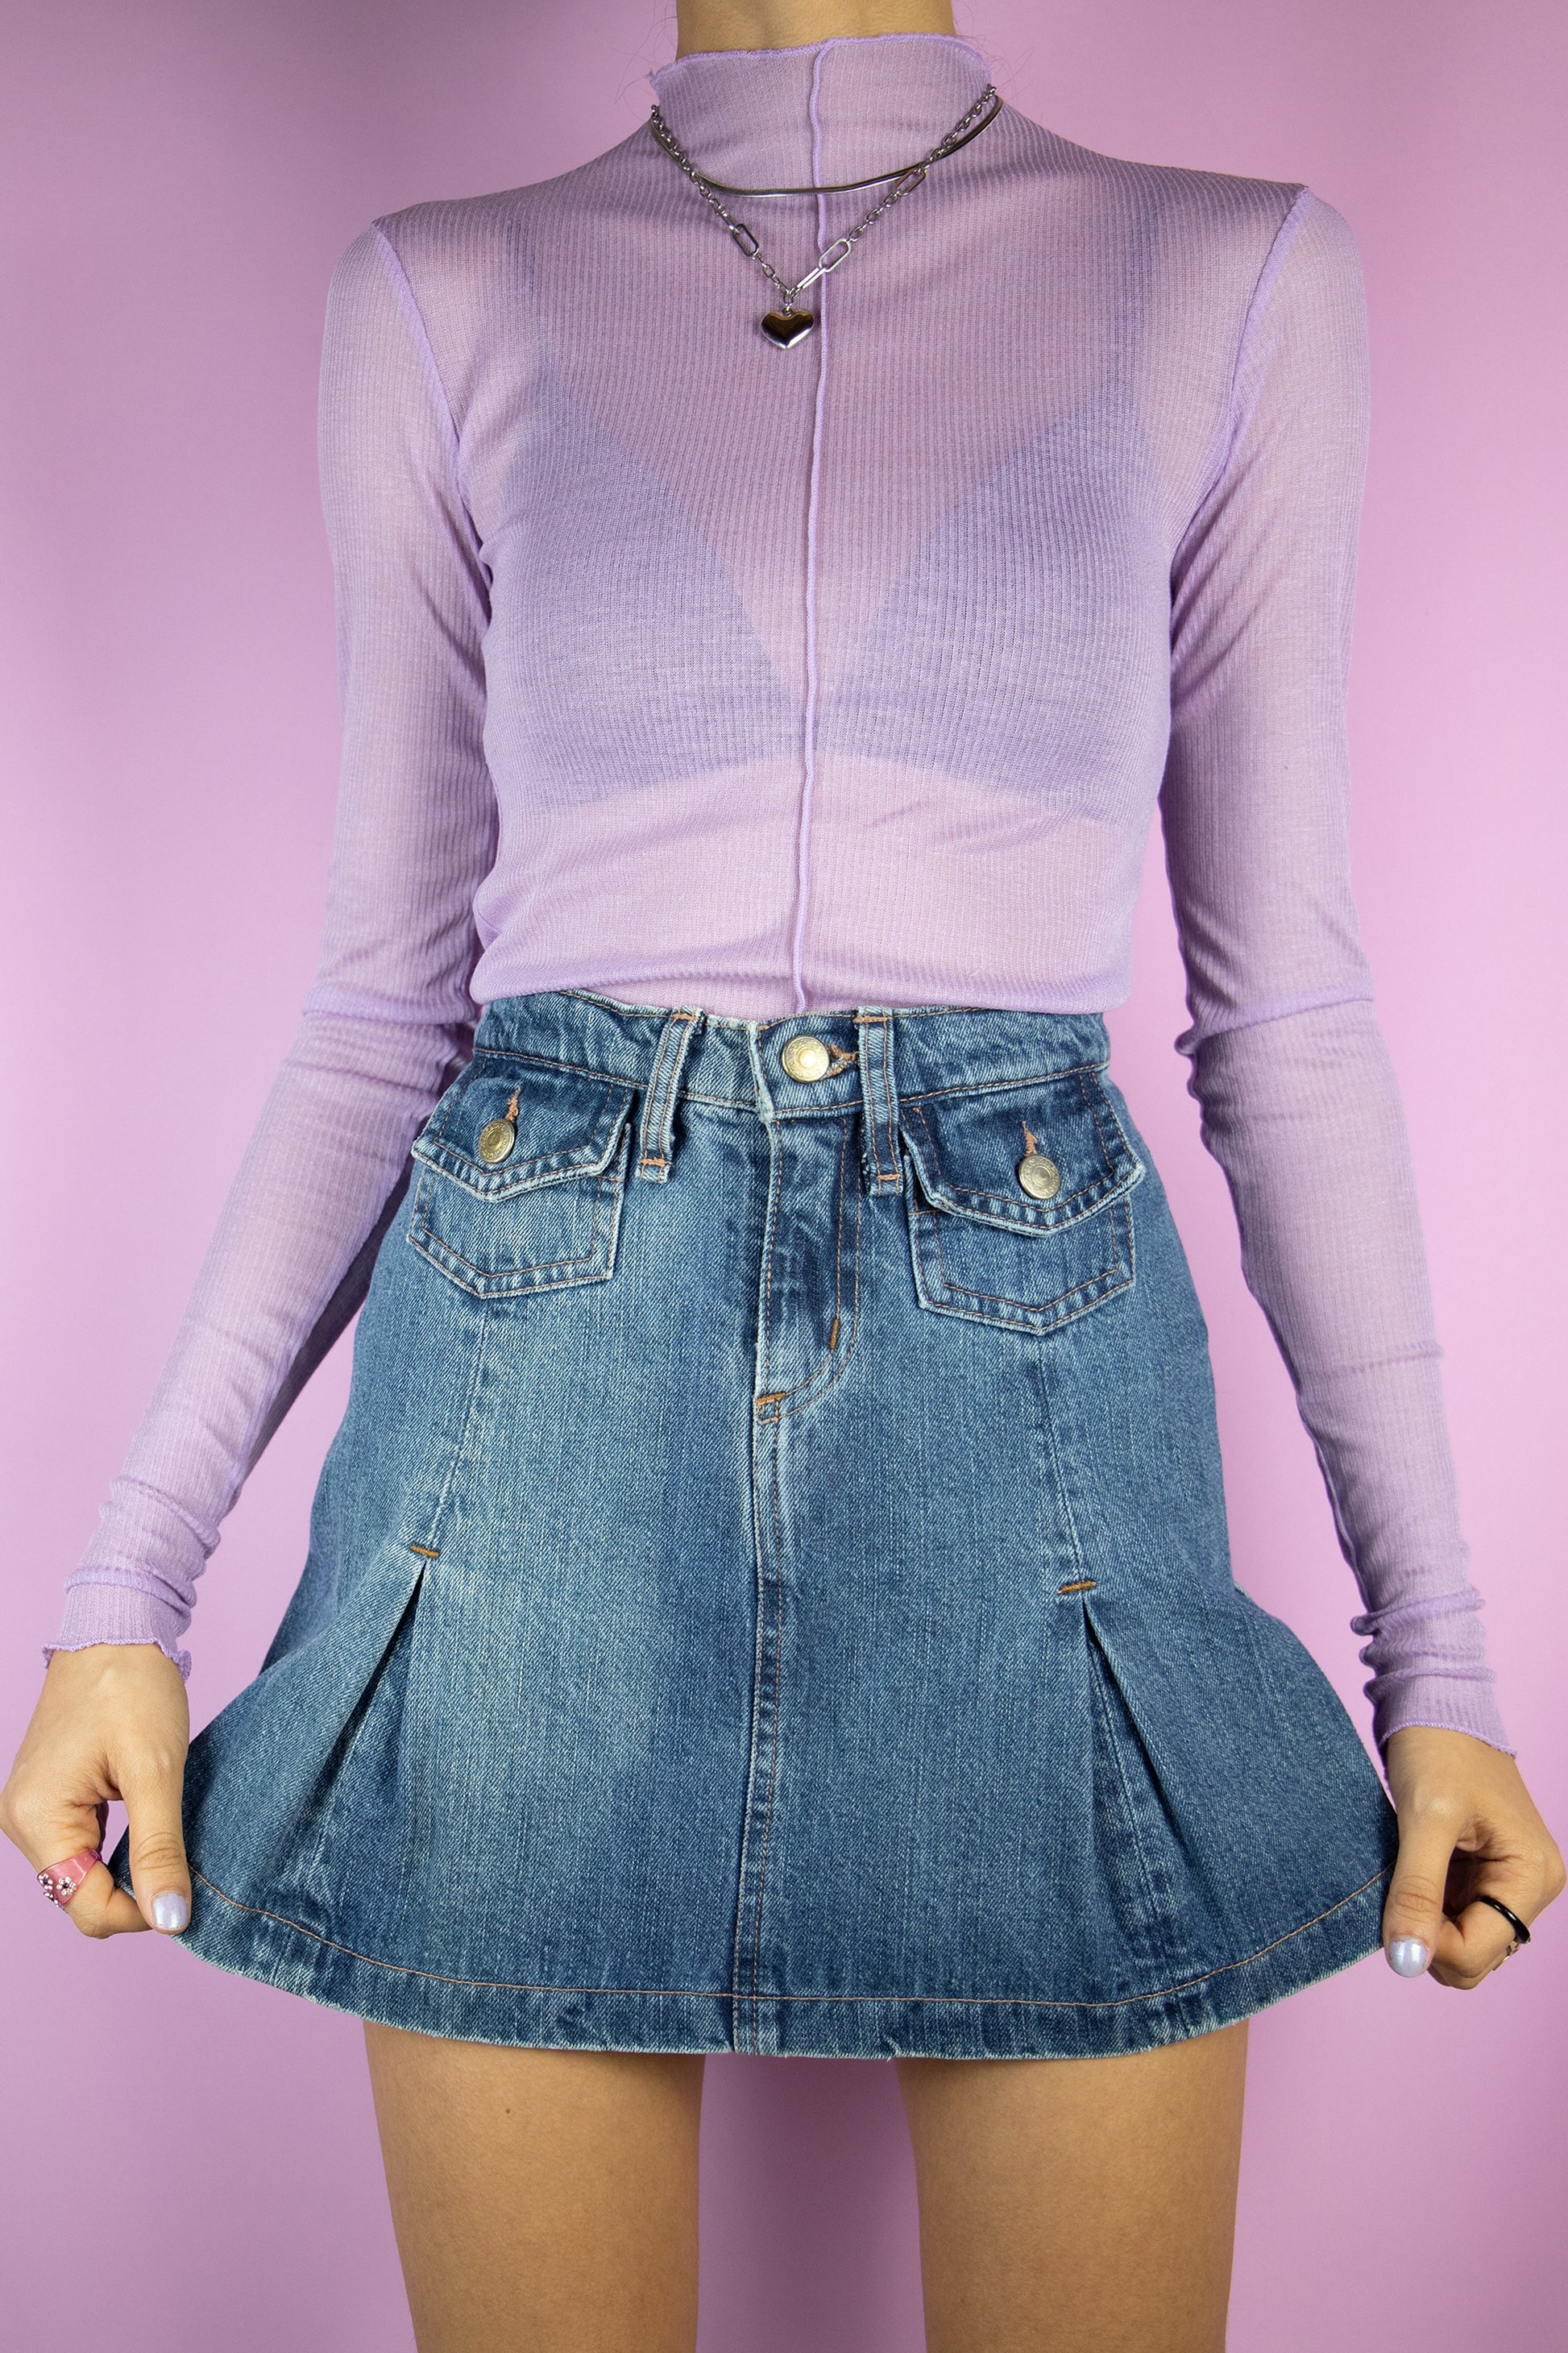 The Vintage 90s Denim Pleated Mini Skirt is a denim skirt with pleats and pockets. Cyber 2000s jean mini skirt.